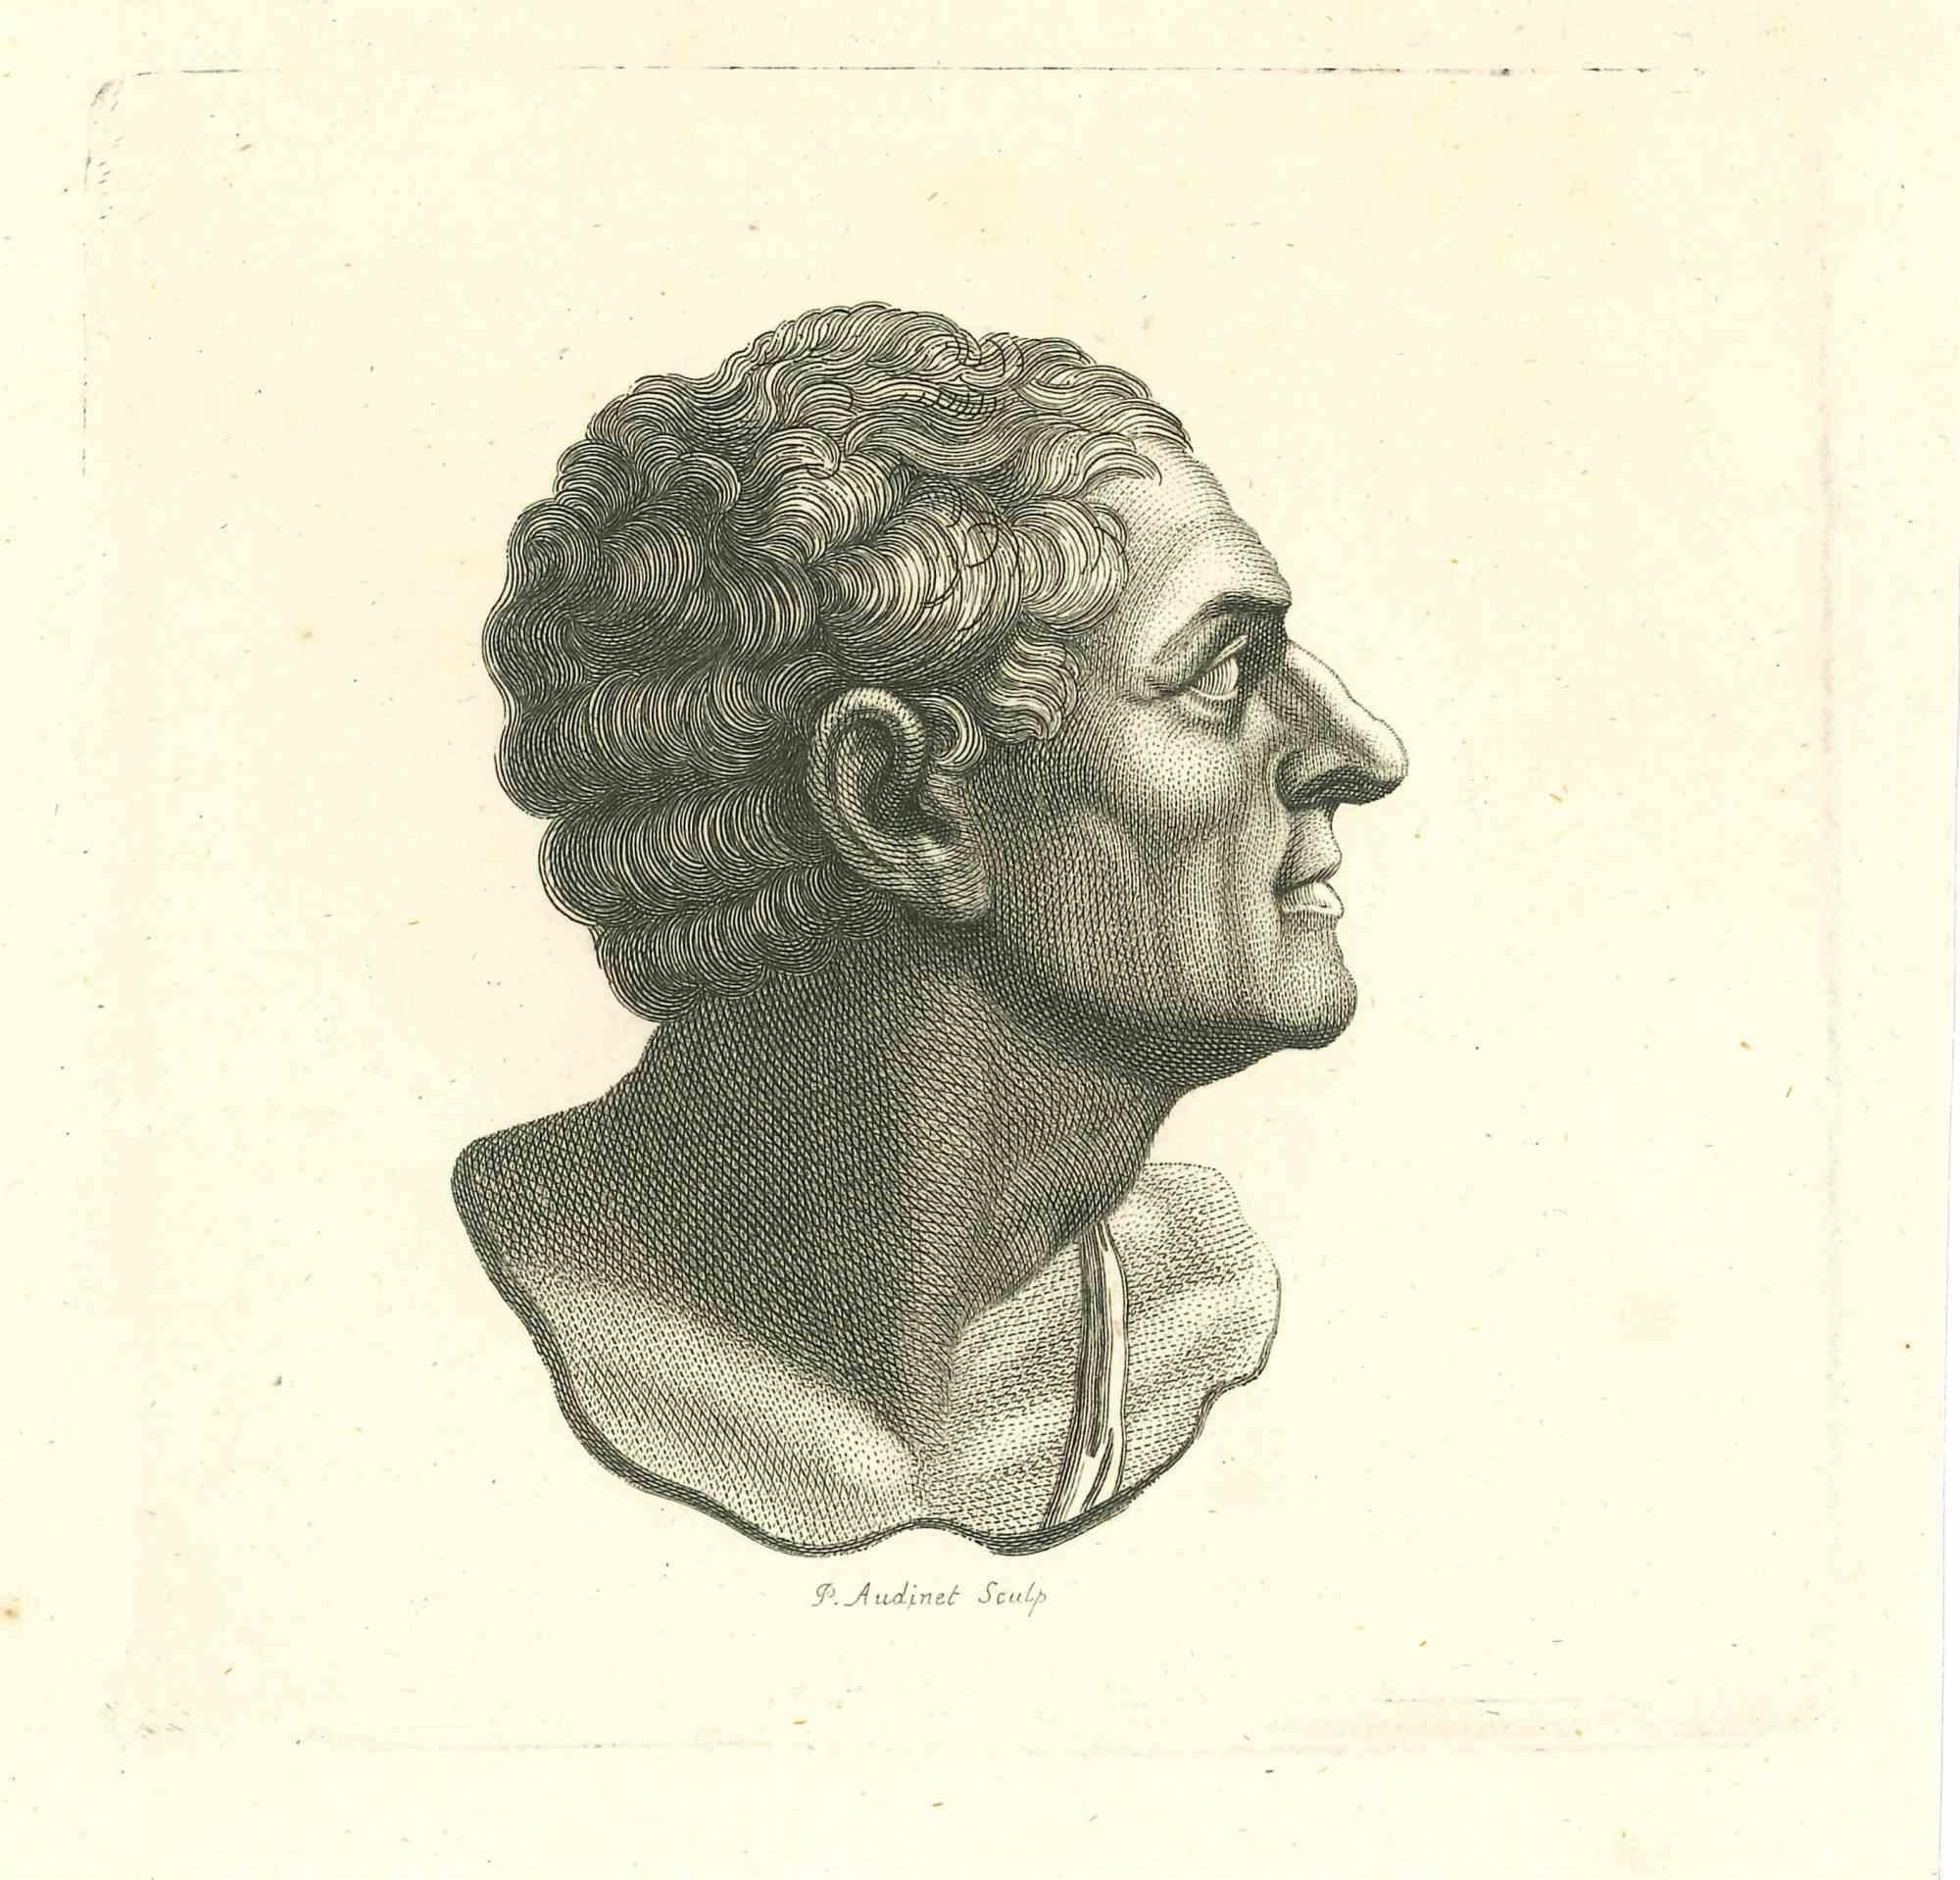 The Physiognomy -The Profile is an original etching artwork realized by Thomas Holloway for Johann Caspar Lavater's "Essays on Physiognomy, Designed to Promote the Knowledge and the Love of Mankind", London, Bensley, 1810. 

Good conditions.

With